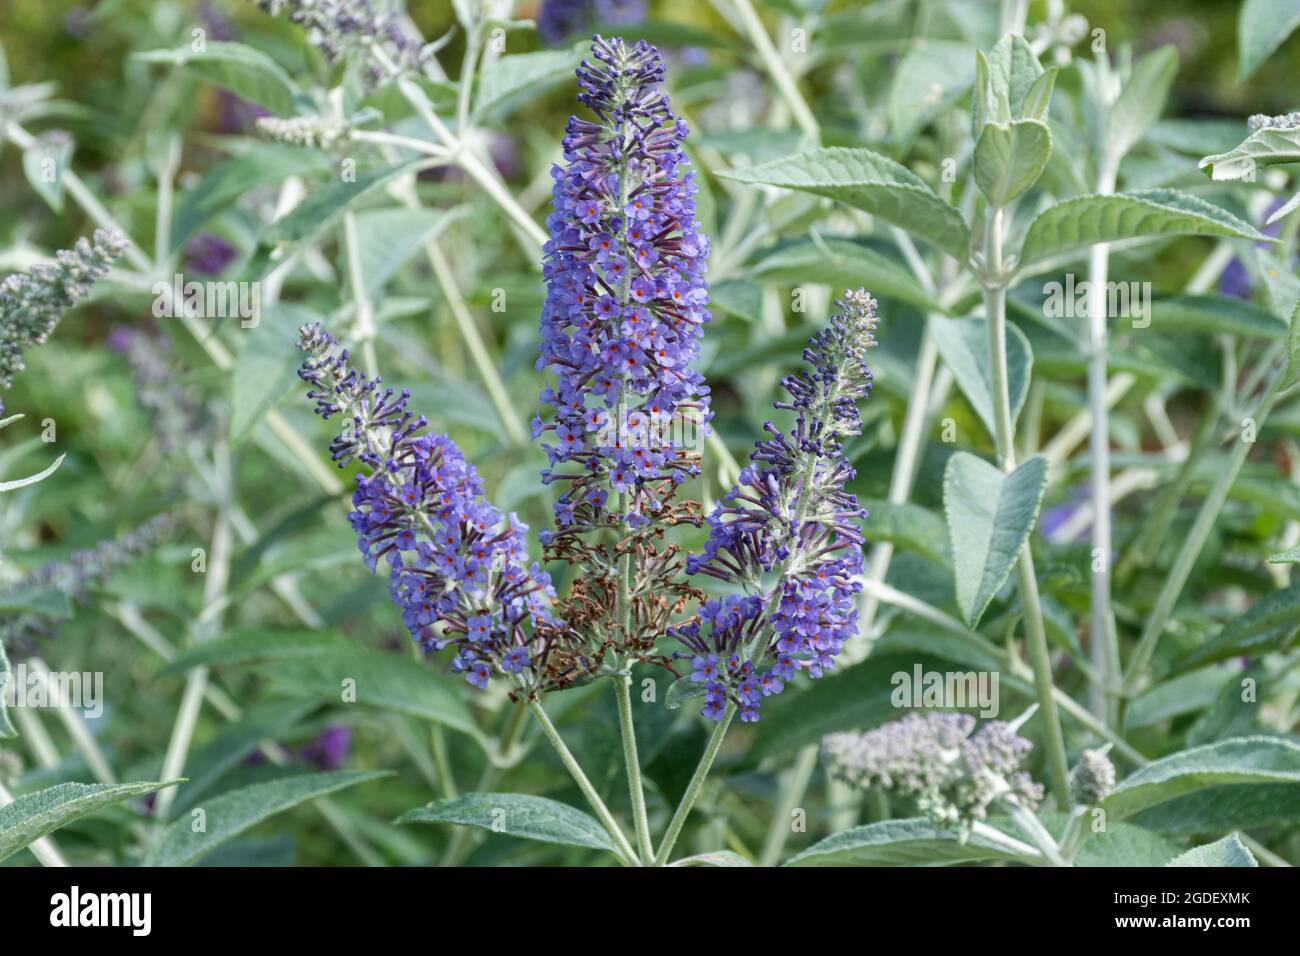 Buddleja davidii Southcombe Splendour (buddleia variety), known as a butterfly bush, in flower during august or summer, UK Stock Photo